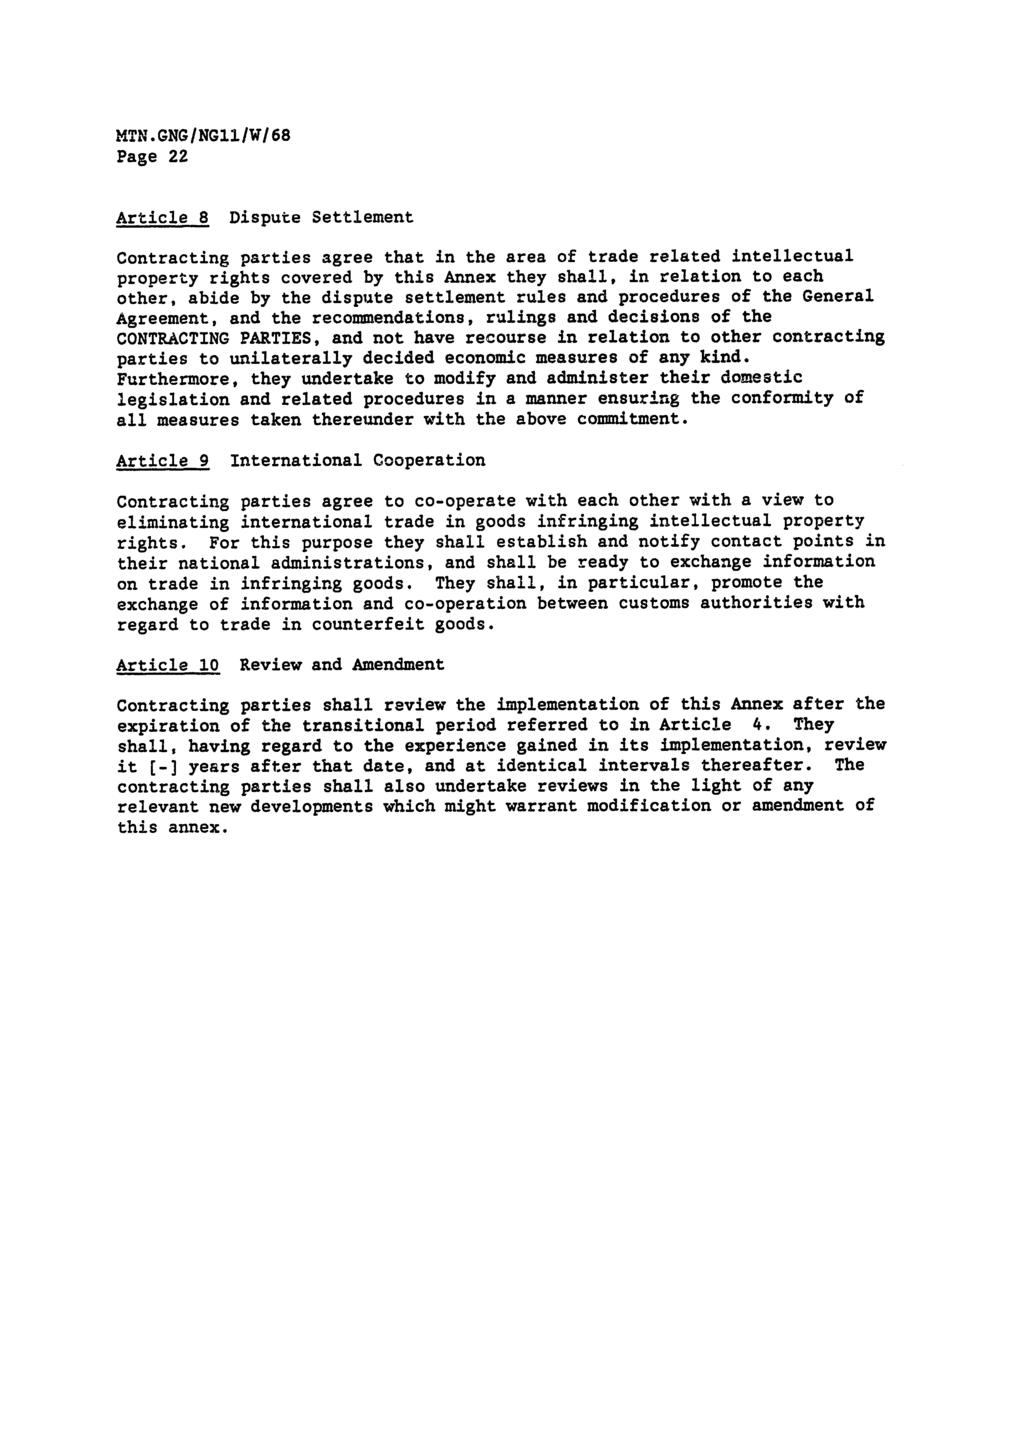 MTN.GNG/NGl1/W/68 Page 22 Article 8 Dispute Settlement Contracting parties agree that in the area of trade related intellectual property rights covered by this Annex they shall, in relation to each